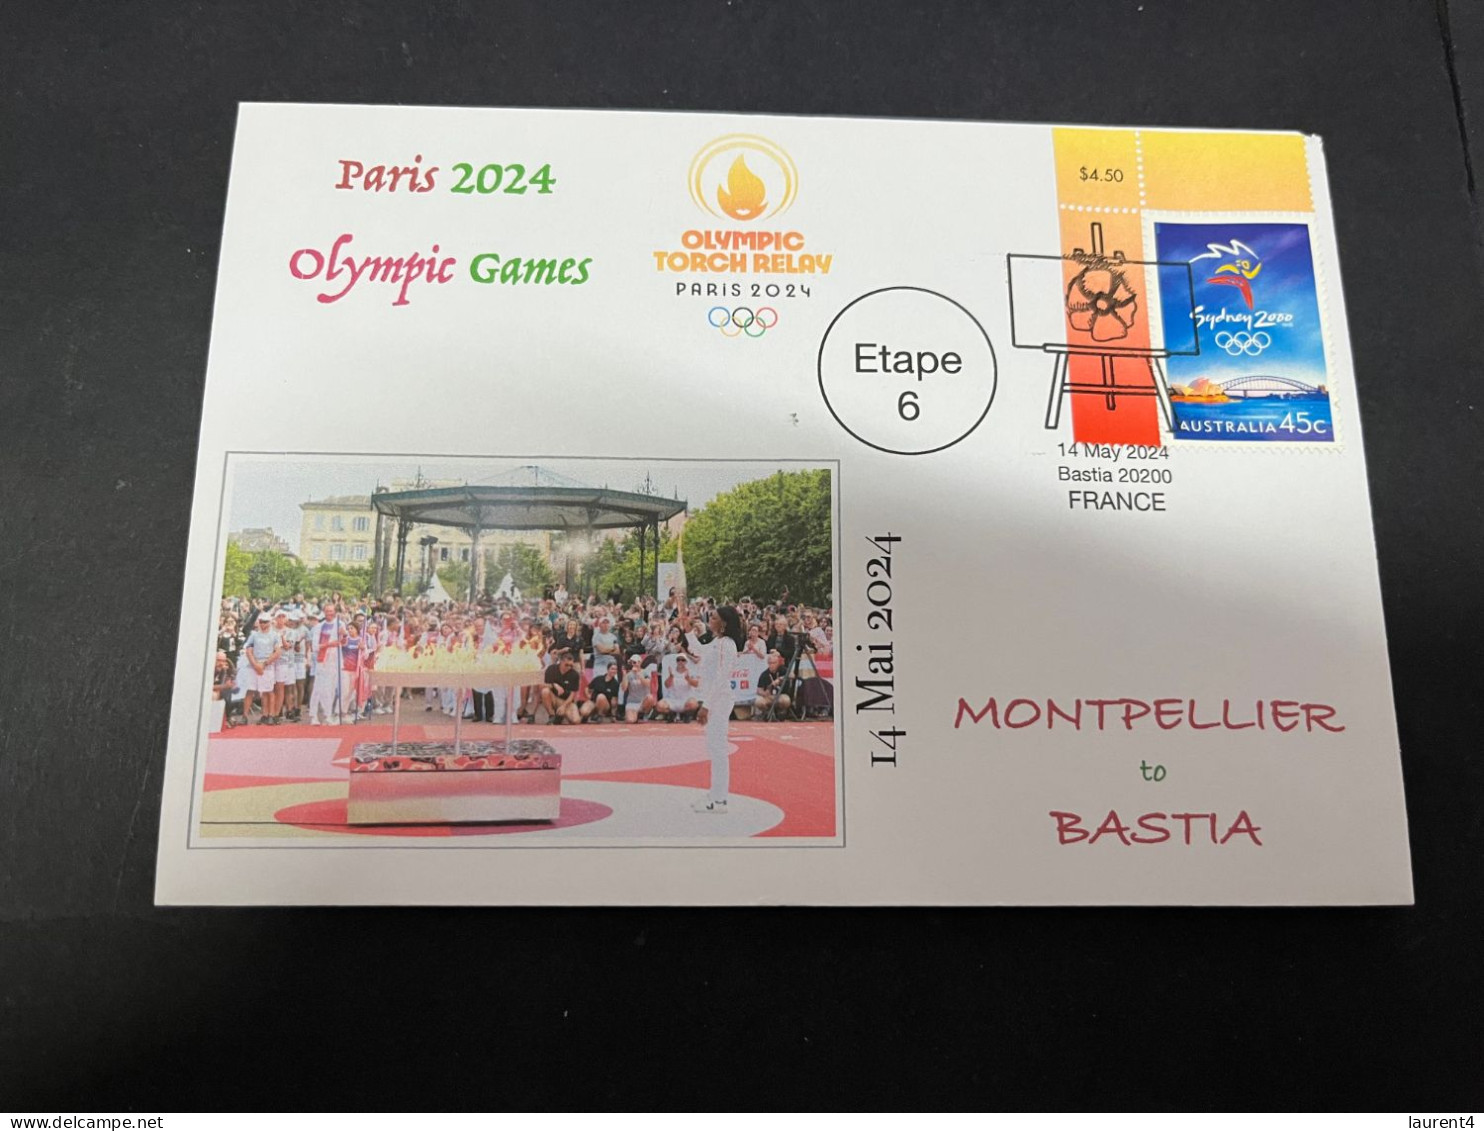 15-5-2024 (5 Z 12) Paris Olympic Games 2024 - Torch Relay (Etape 6) In Bastia (14-5-2024) With OLYMPIC Stamp - Summer 2024: Paris